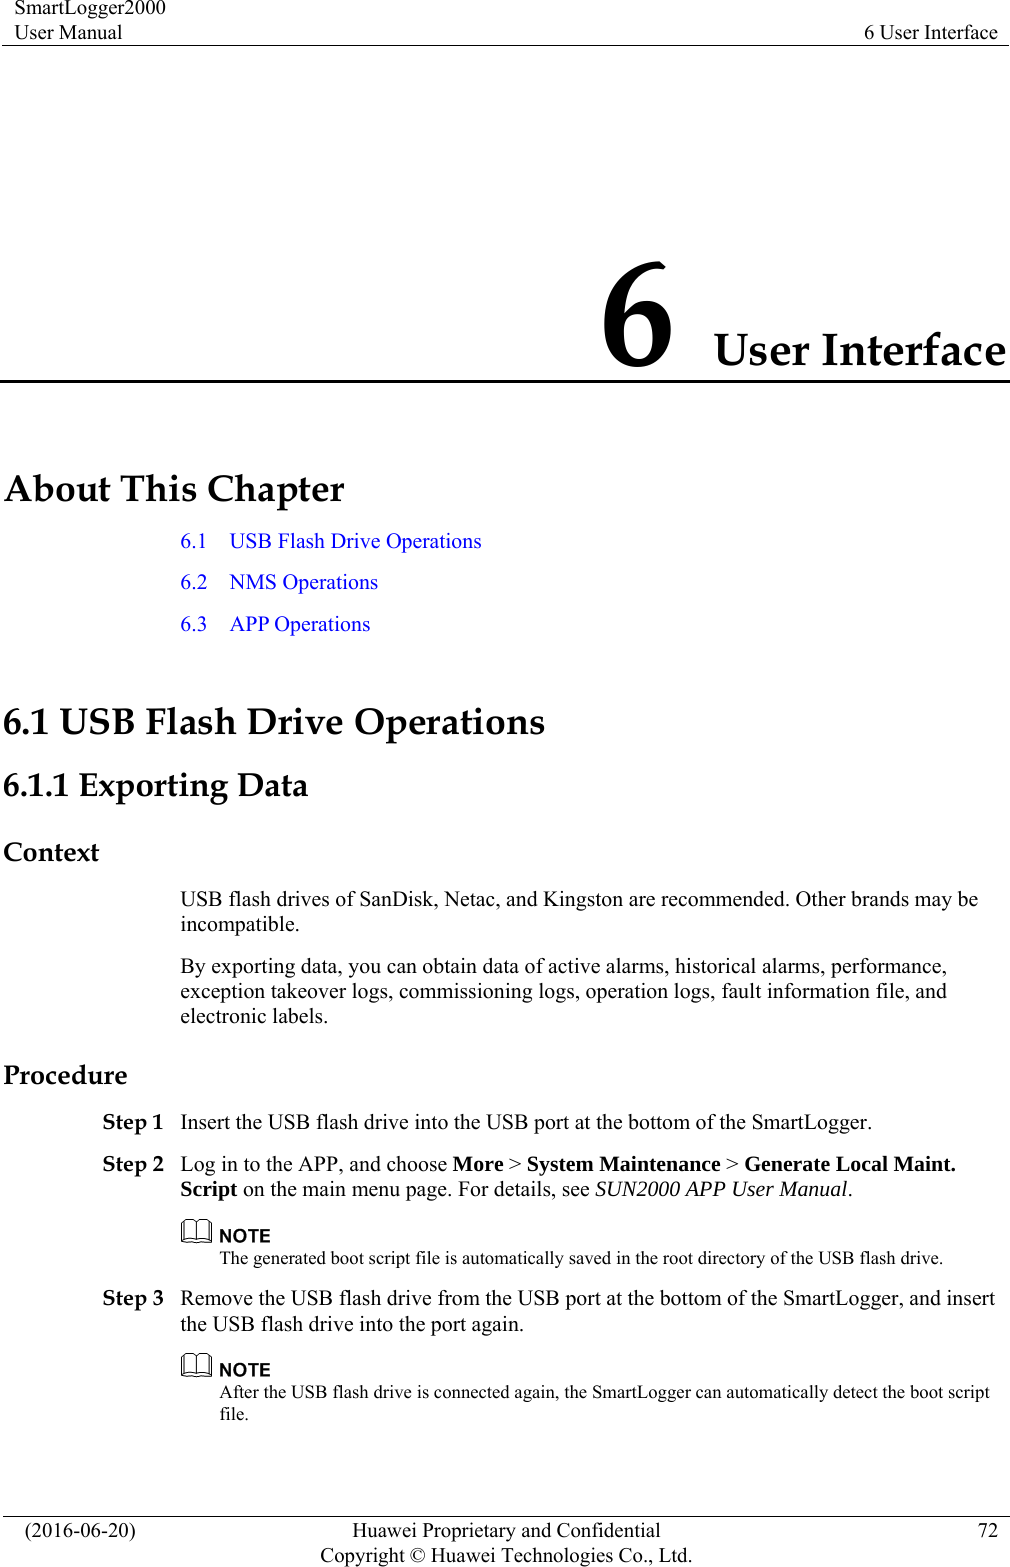 SmartLogger2000 User Manual  6 User Interface   (2016-06-20)  Huawei Proprietary and Confidential         Copyright © Huawei Technologies Co., Ltd.72 6 User Interface About This Chapter 6.1    USB Flash Drive Operations 6.2  NMS Operations 6.3  APP Operations 6.1 USB Flash Drive Operations 6.1.1 Exporting Data Context USB flash drives of SanDisk, Netac, and Kingston are recommended. Other brands may be incompatible. By exporting data, you can obtain data of active alarms, historical alarms, performance, exception takeover logs, commissioning logs, operation logs, fault information file, and electronic labels.   Procedure Step 1 Insert the USB flash drive into the USB port at the bottom of the SmartLogger. Step 2 Log in to the APP, and choose More &gt; System Maintenance &gt; Generate Local Maint. Script on the main menu page. For details, see SUN2000 APP User Manual.   The generated boot script file is automatically saved in the root directory of the USB flash drive. Step 3 Remove the USB flash drive from the USB port at the bottom of the SmartLogger, and insert the USB flash drive into the port again.    After the USB flash drive is connected again, the SmartLogger can automatically detect the boot script file.  